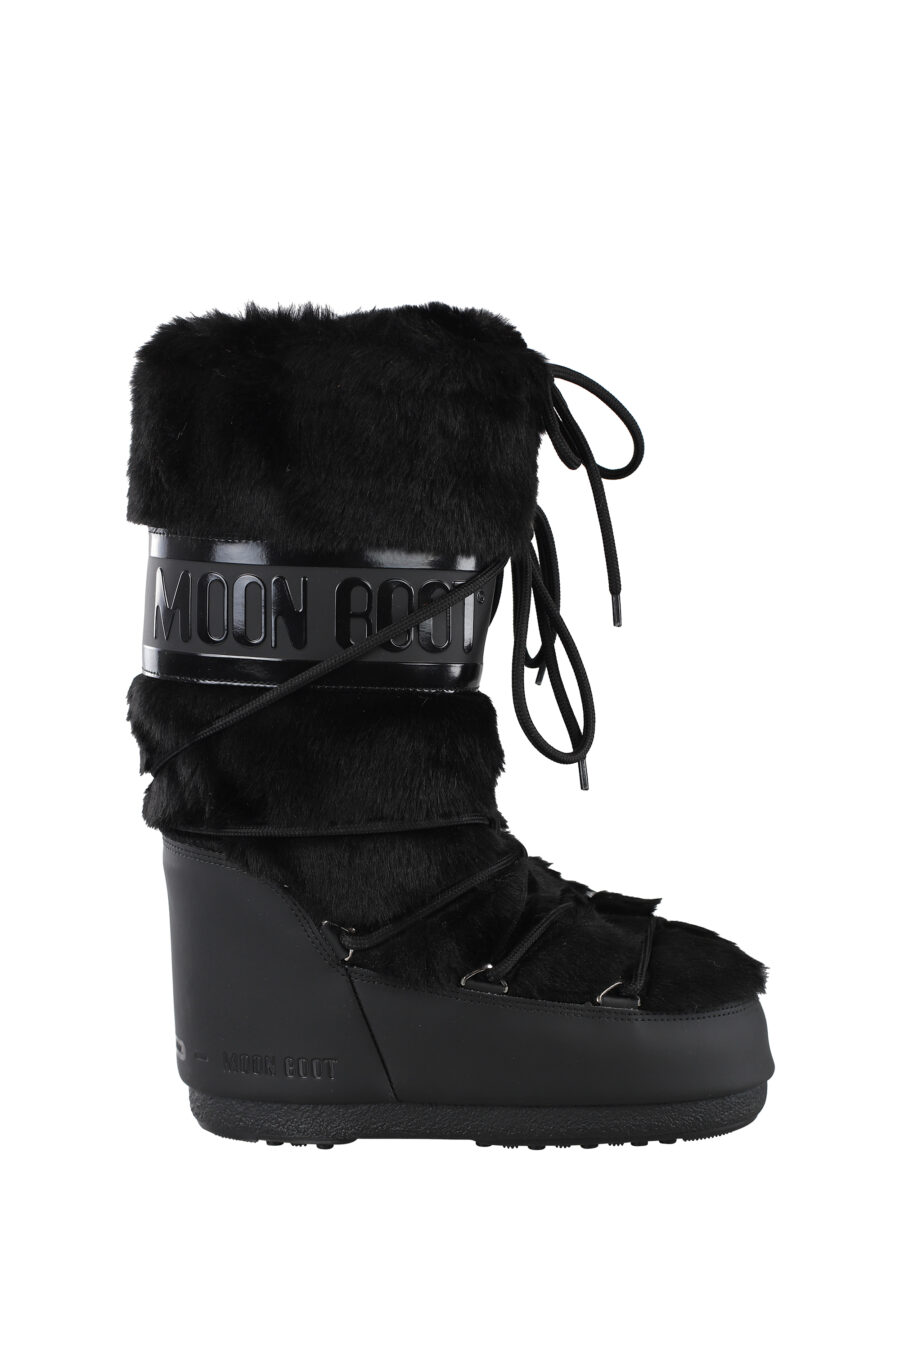 Black snow boots with monochrome logo - IMG 6792